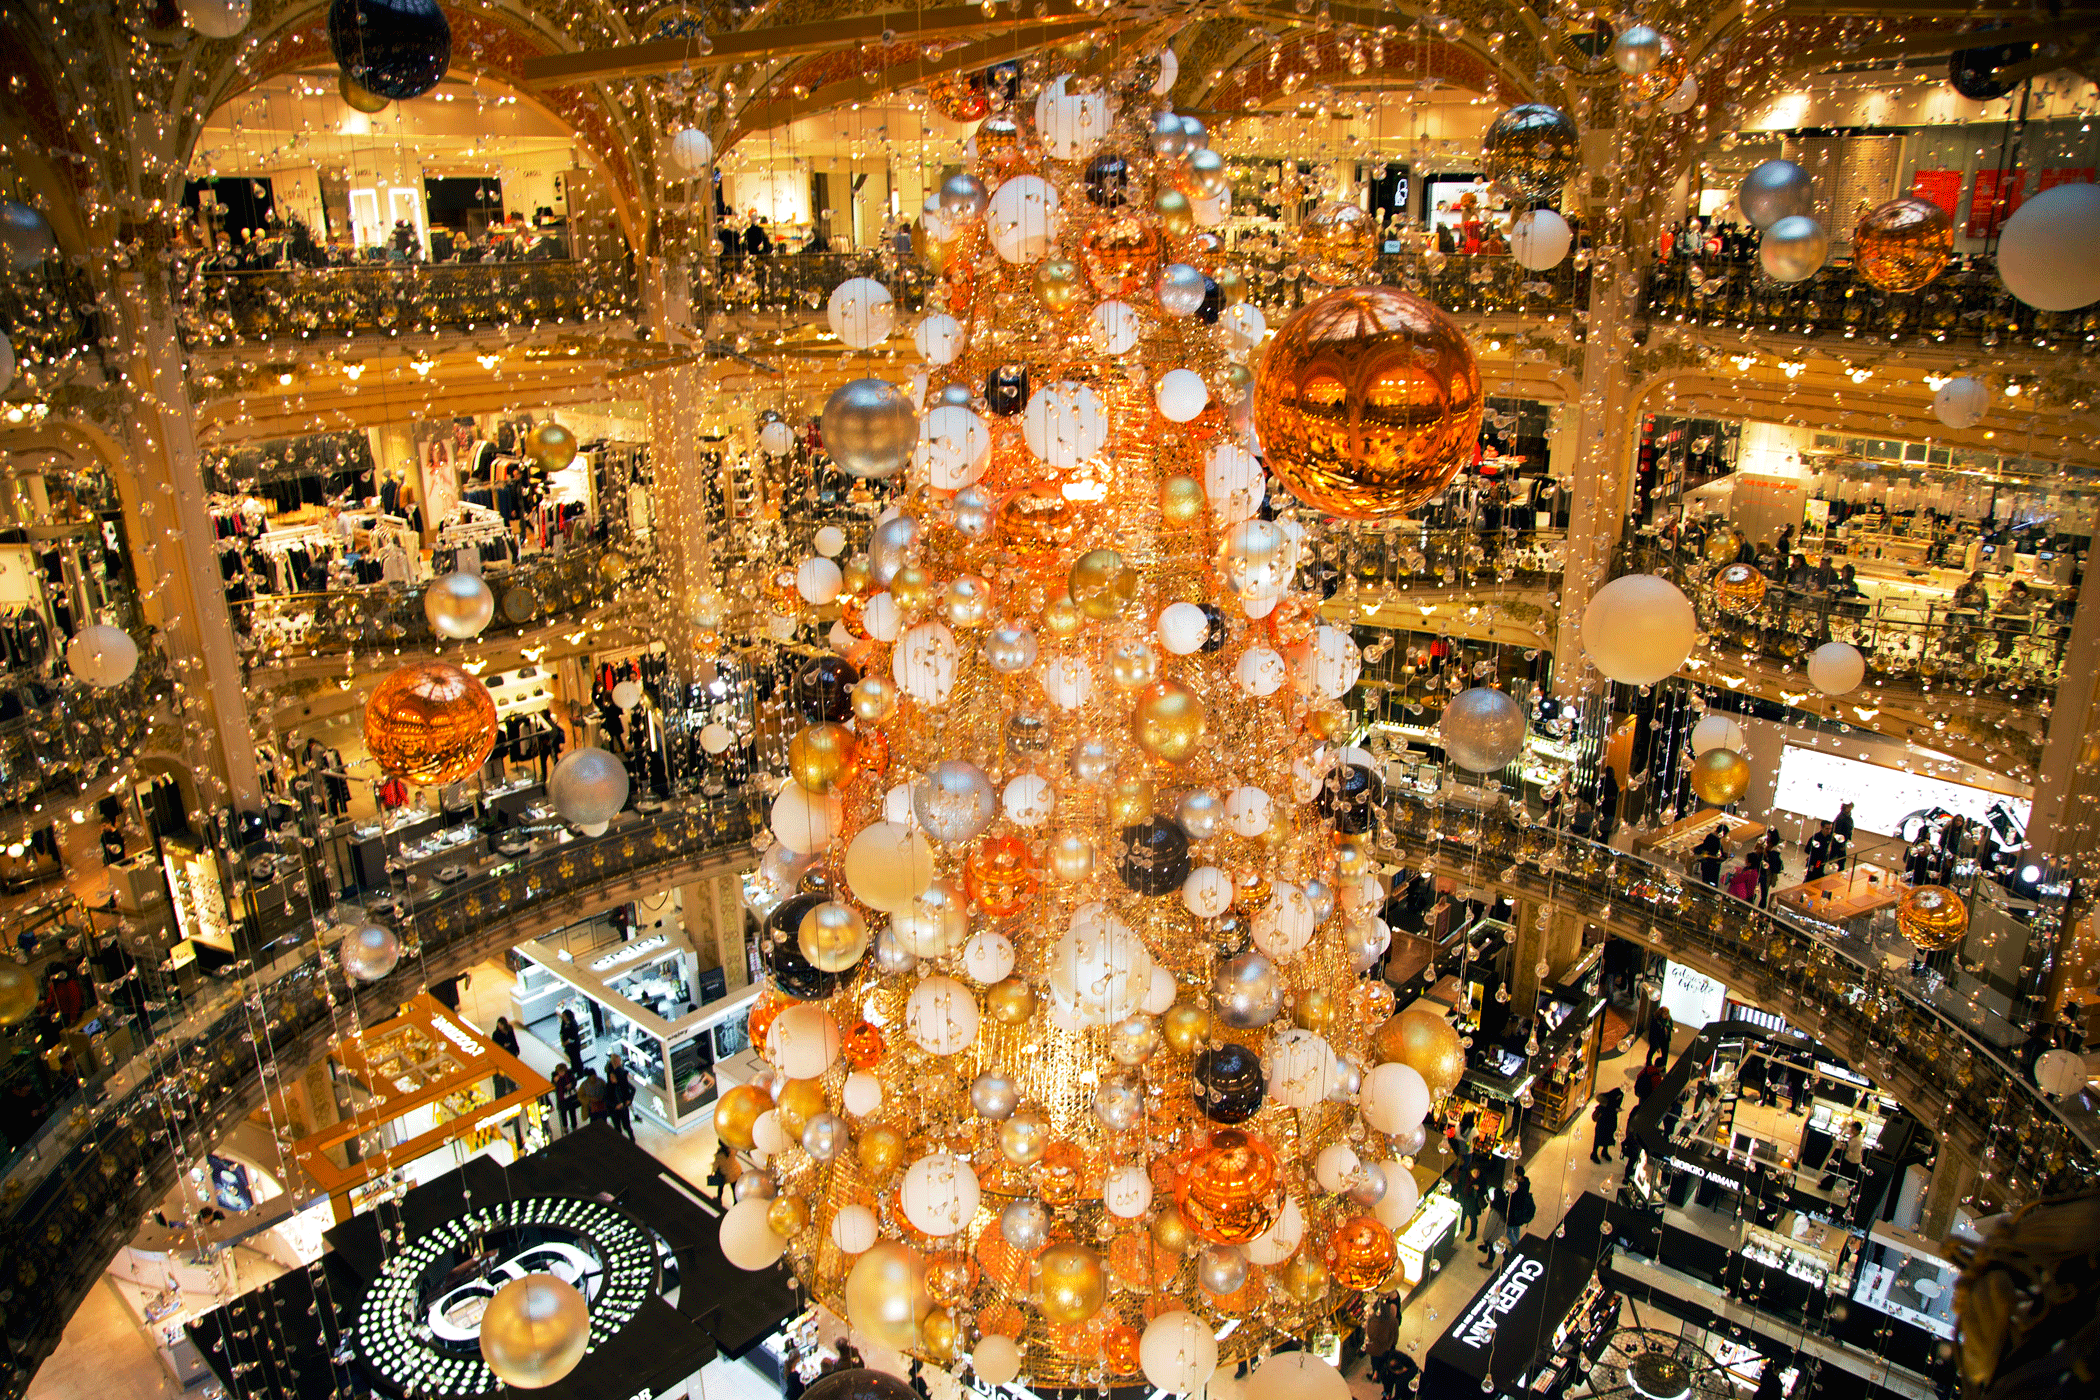 A Christmas tree on display at a Paris department store on Dec. 22, 2015. (AP Photo/Jacques Brinon)